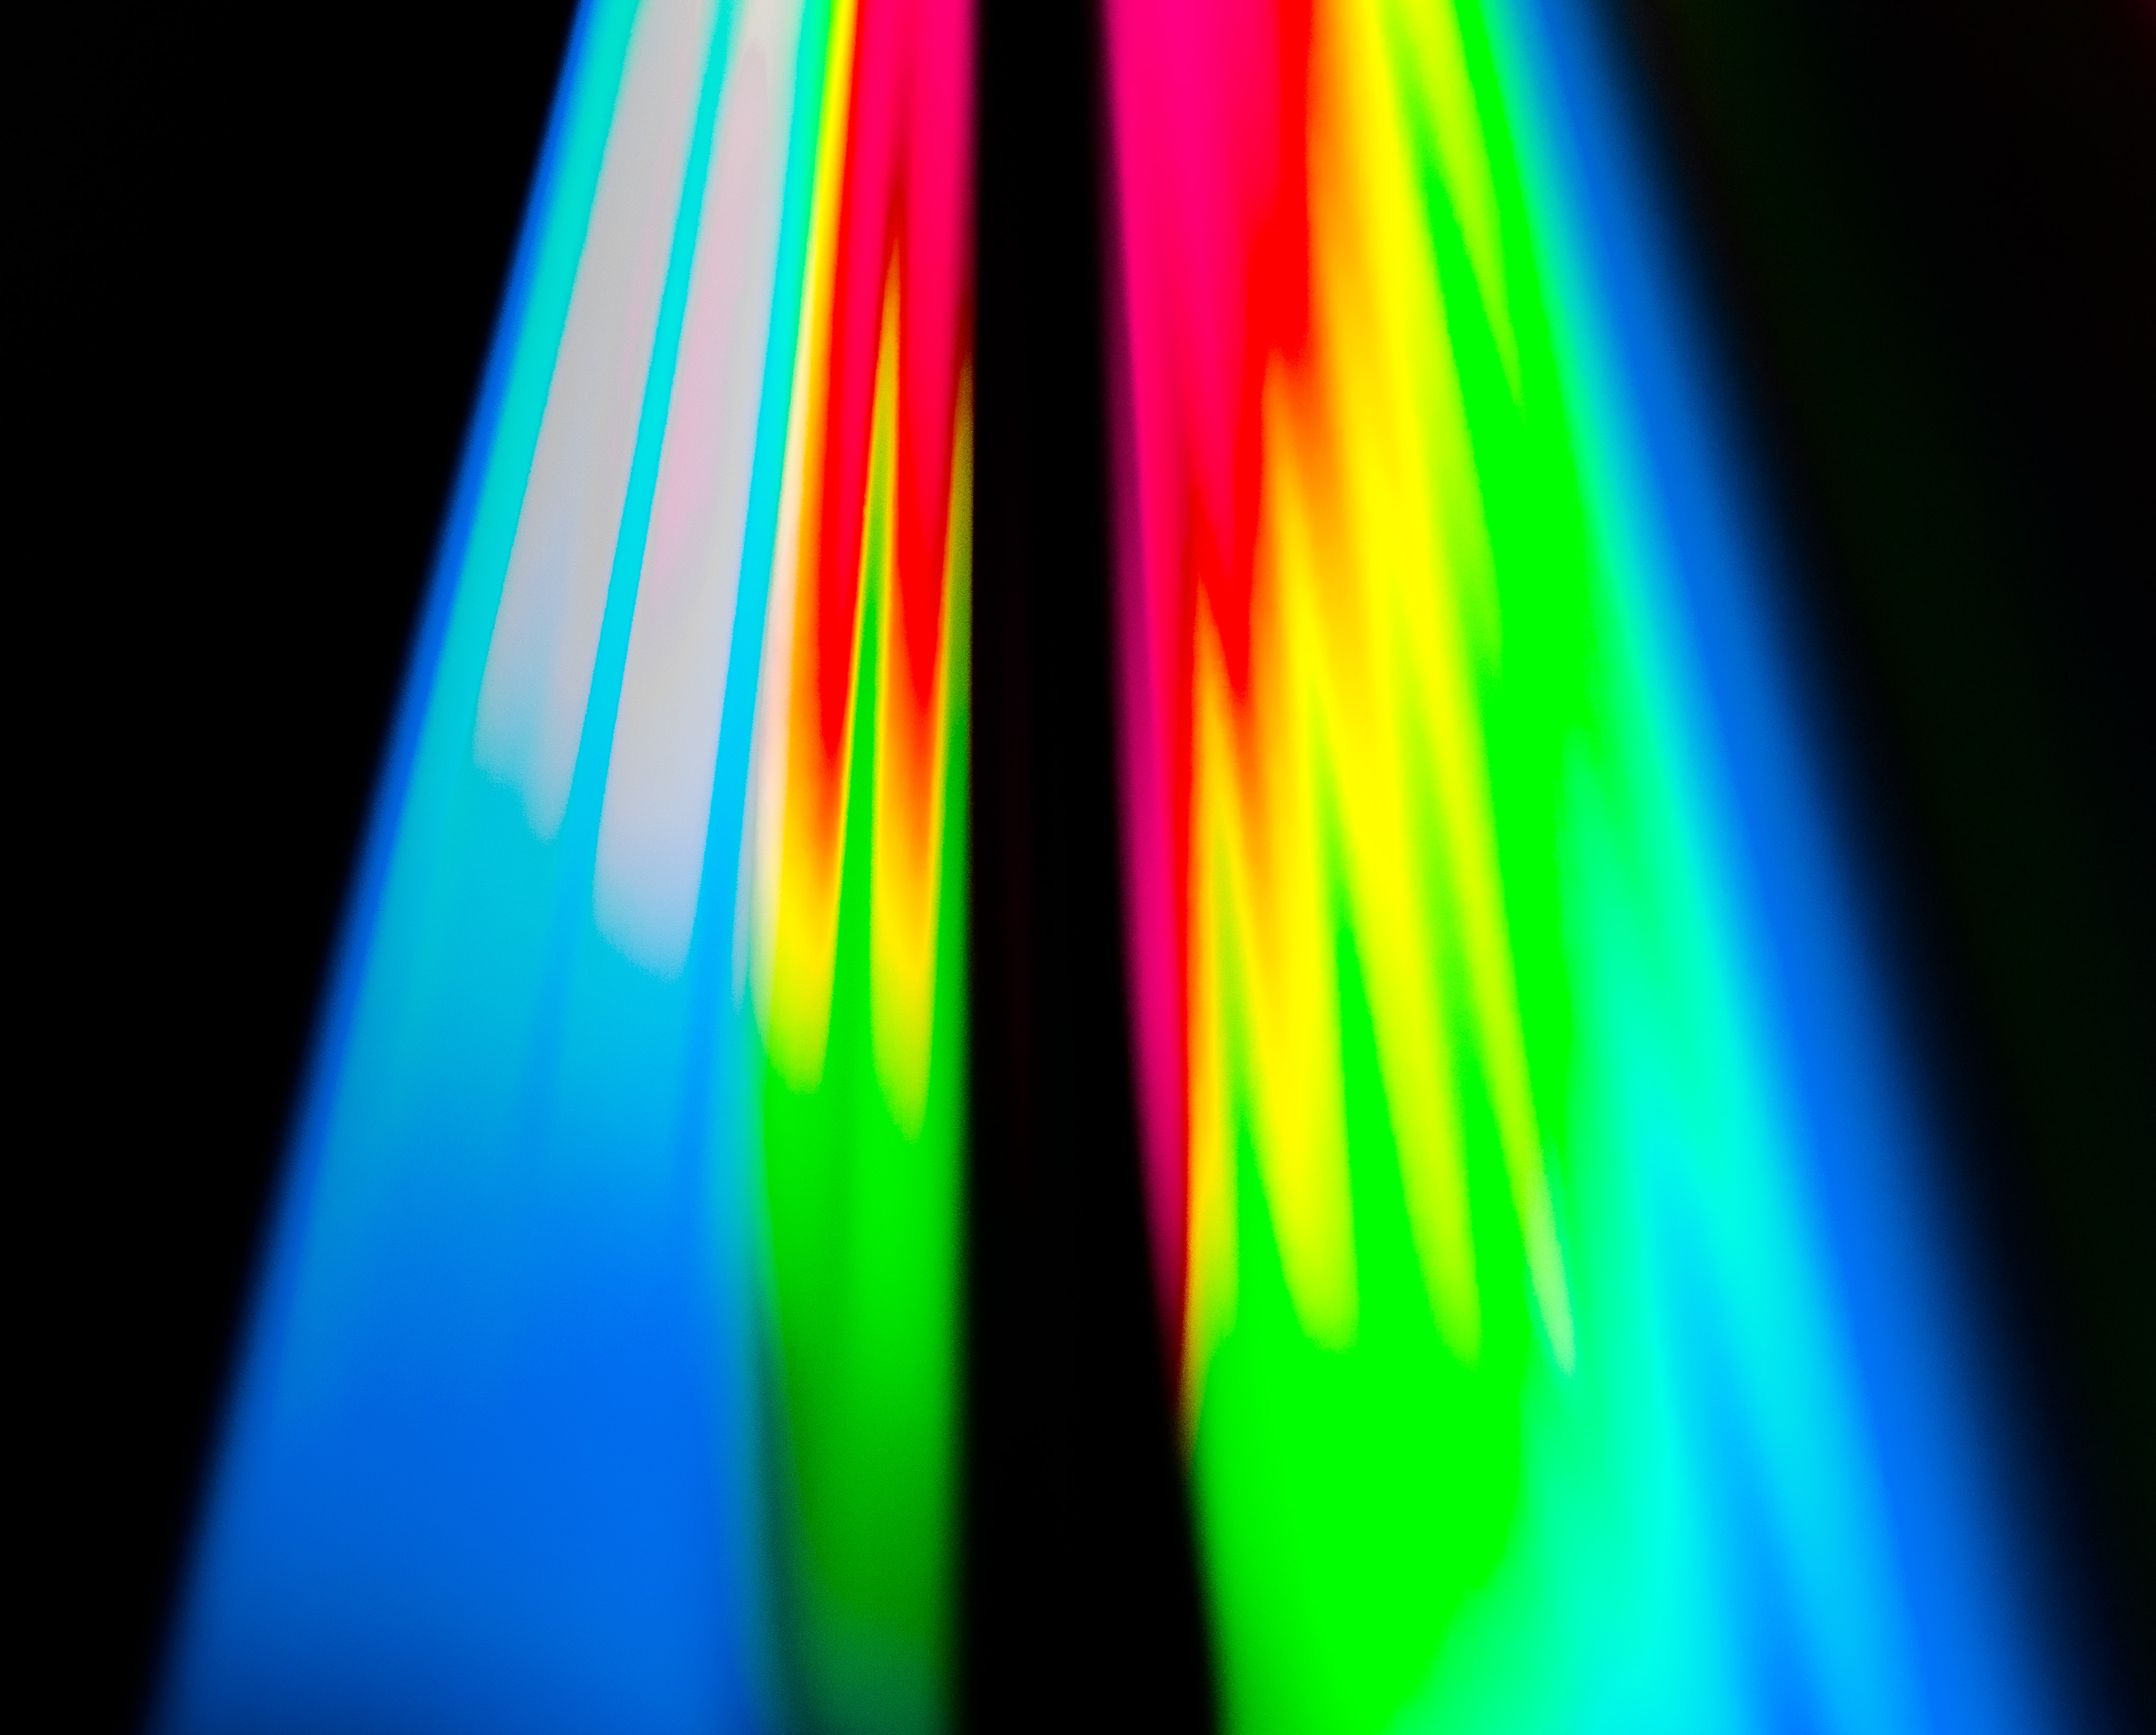 gradient, stripes, abstract, rainbow, black, streaks High Definition image